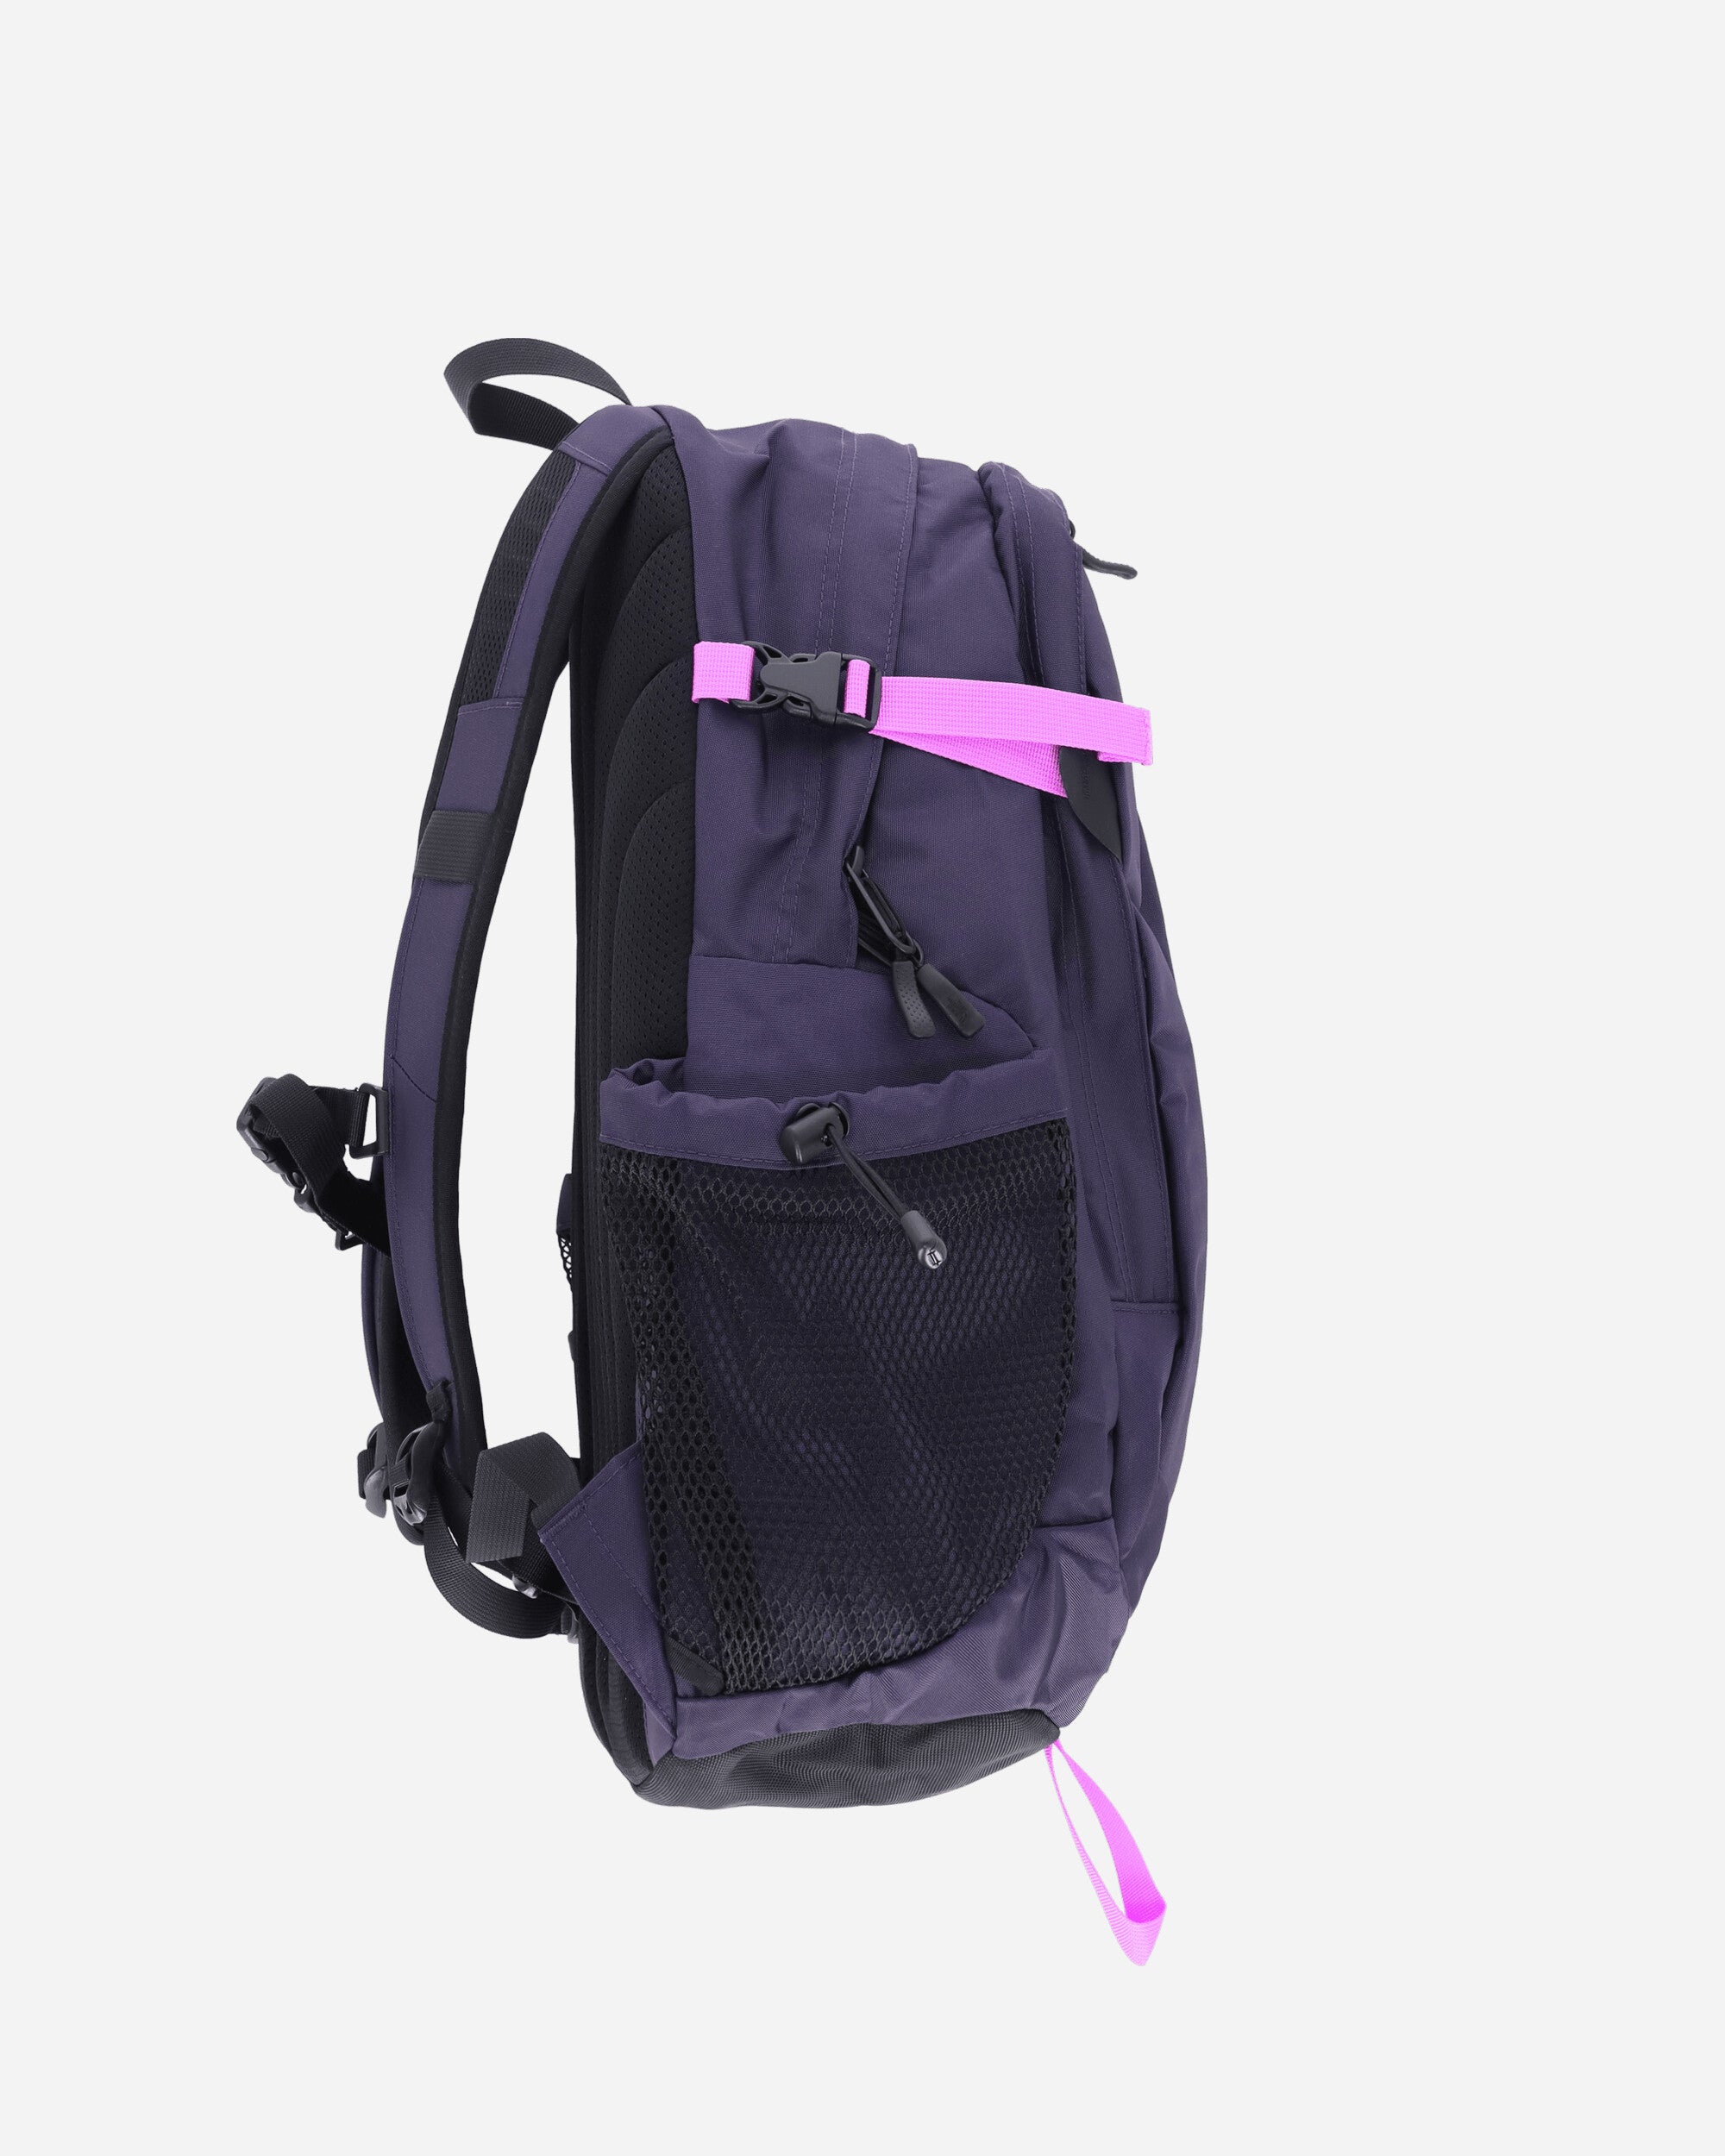 The North Face Hot Shot Se Amethyst Amethyst Purple/Violet Bags and Backpacks Backpacks NF0A3KYJ YIL1